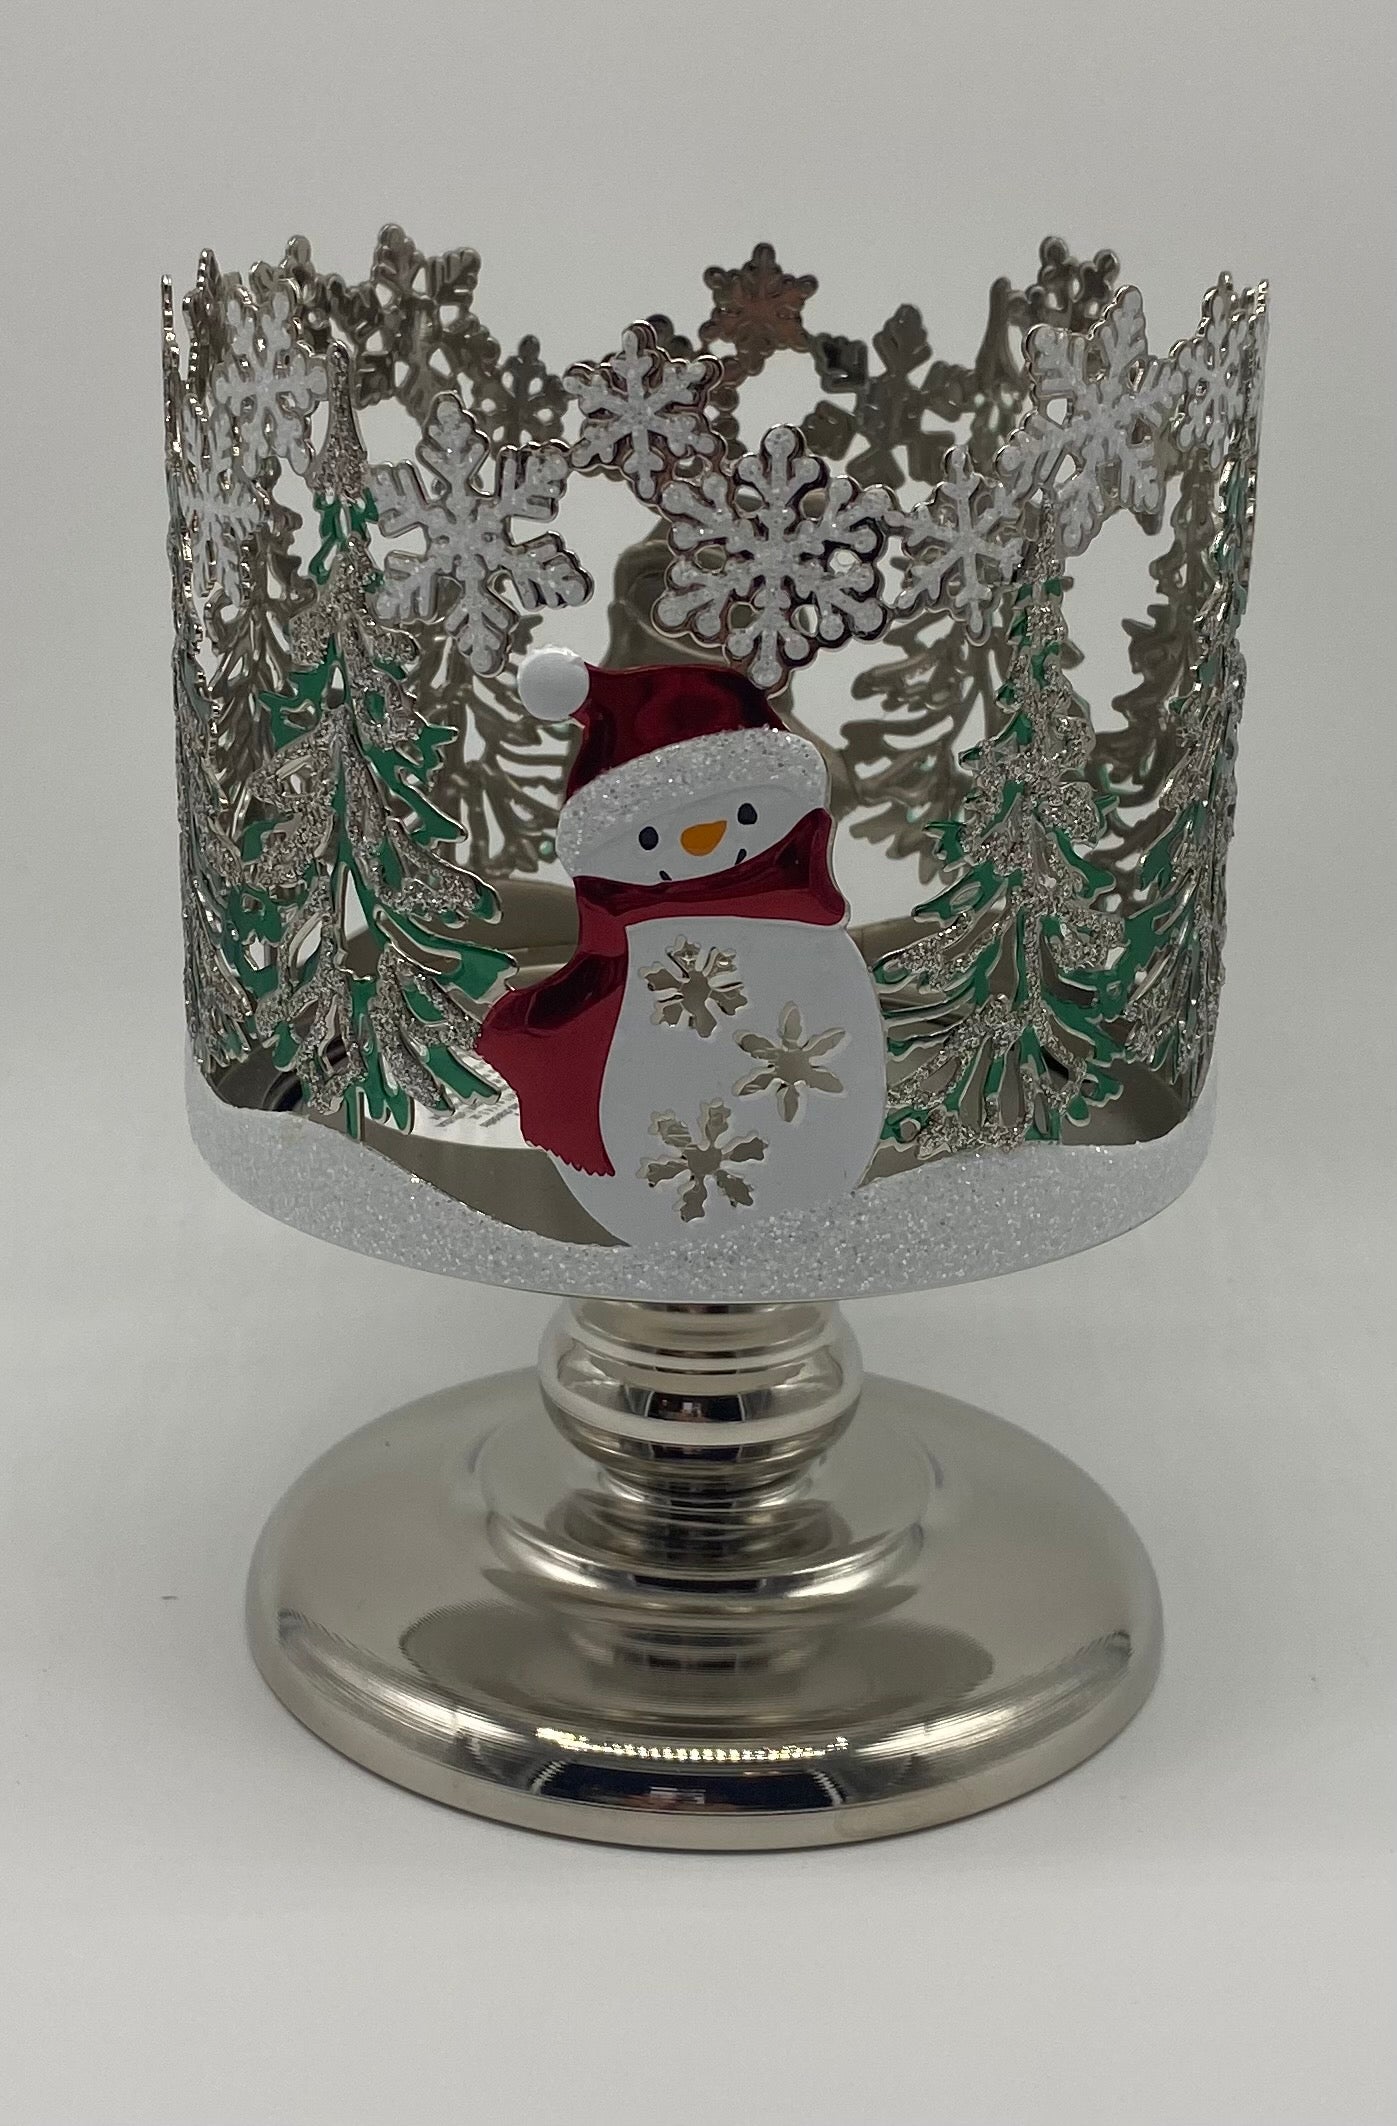 Bath and Body Works 2021 Christmas Snowman 3 Wick Pedestal Candle Holder New